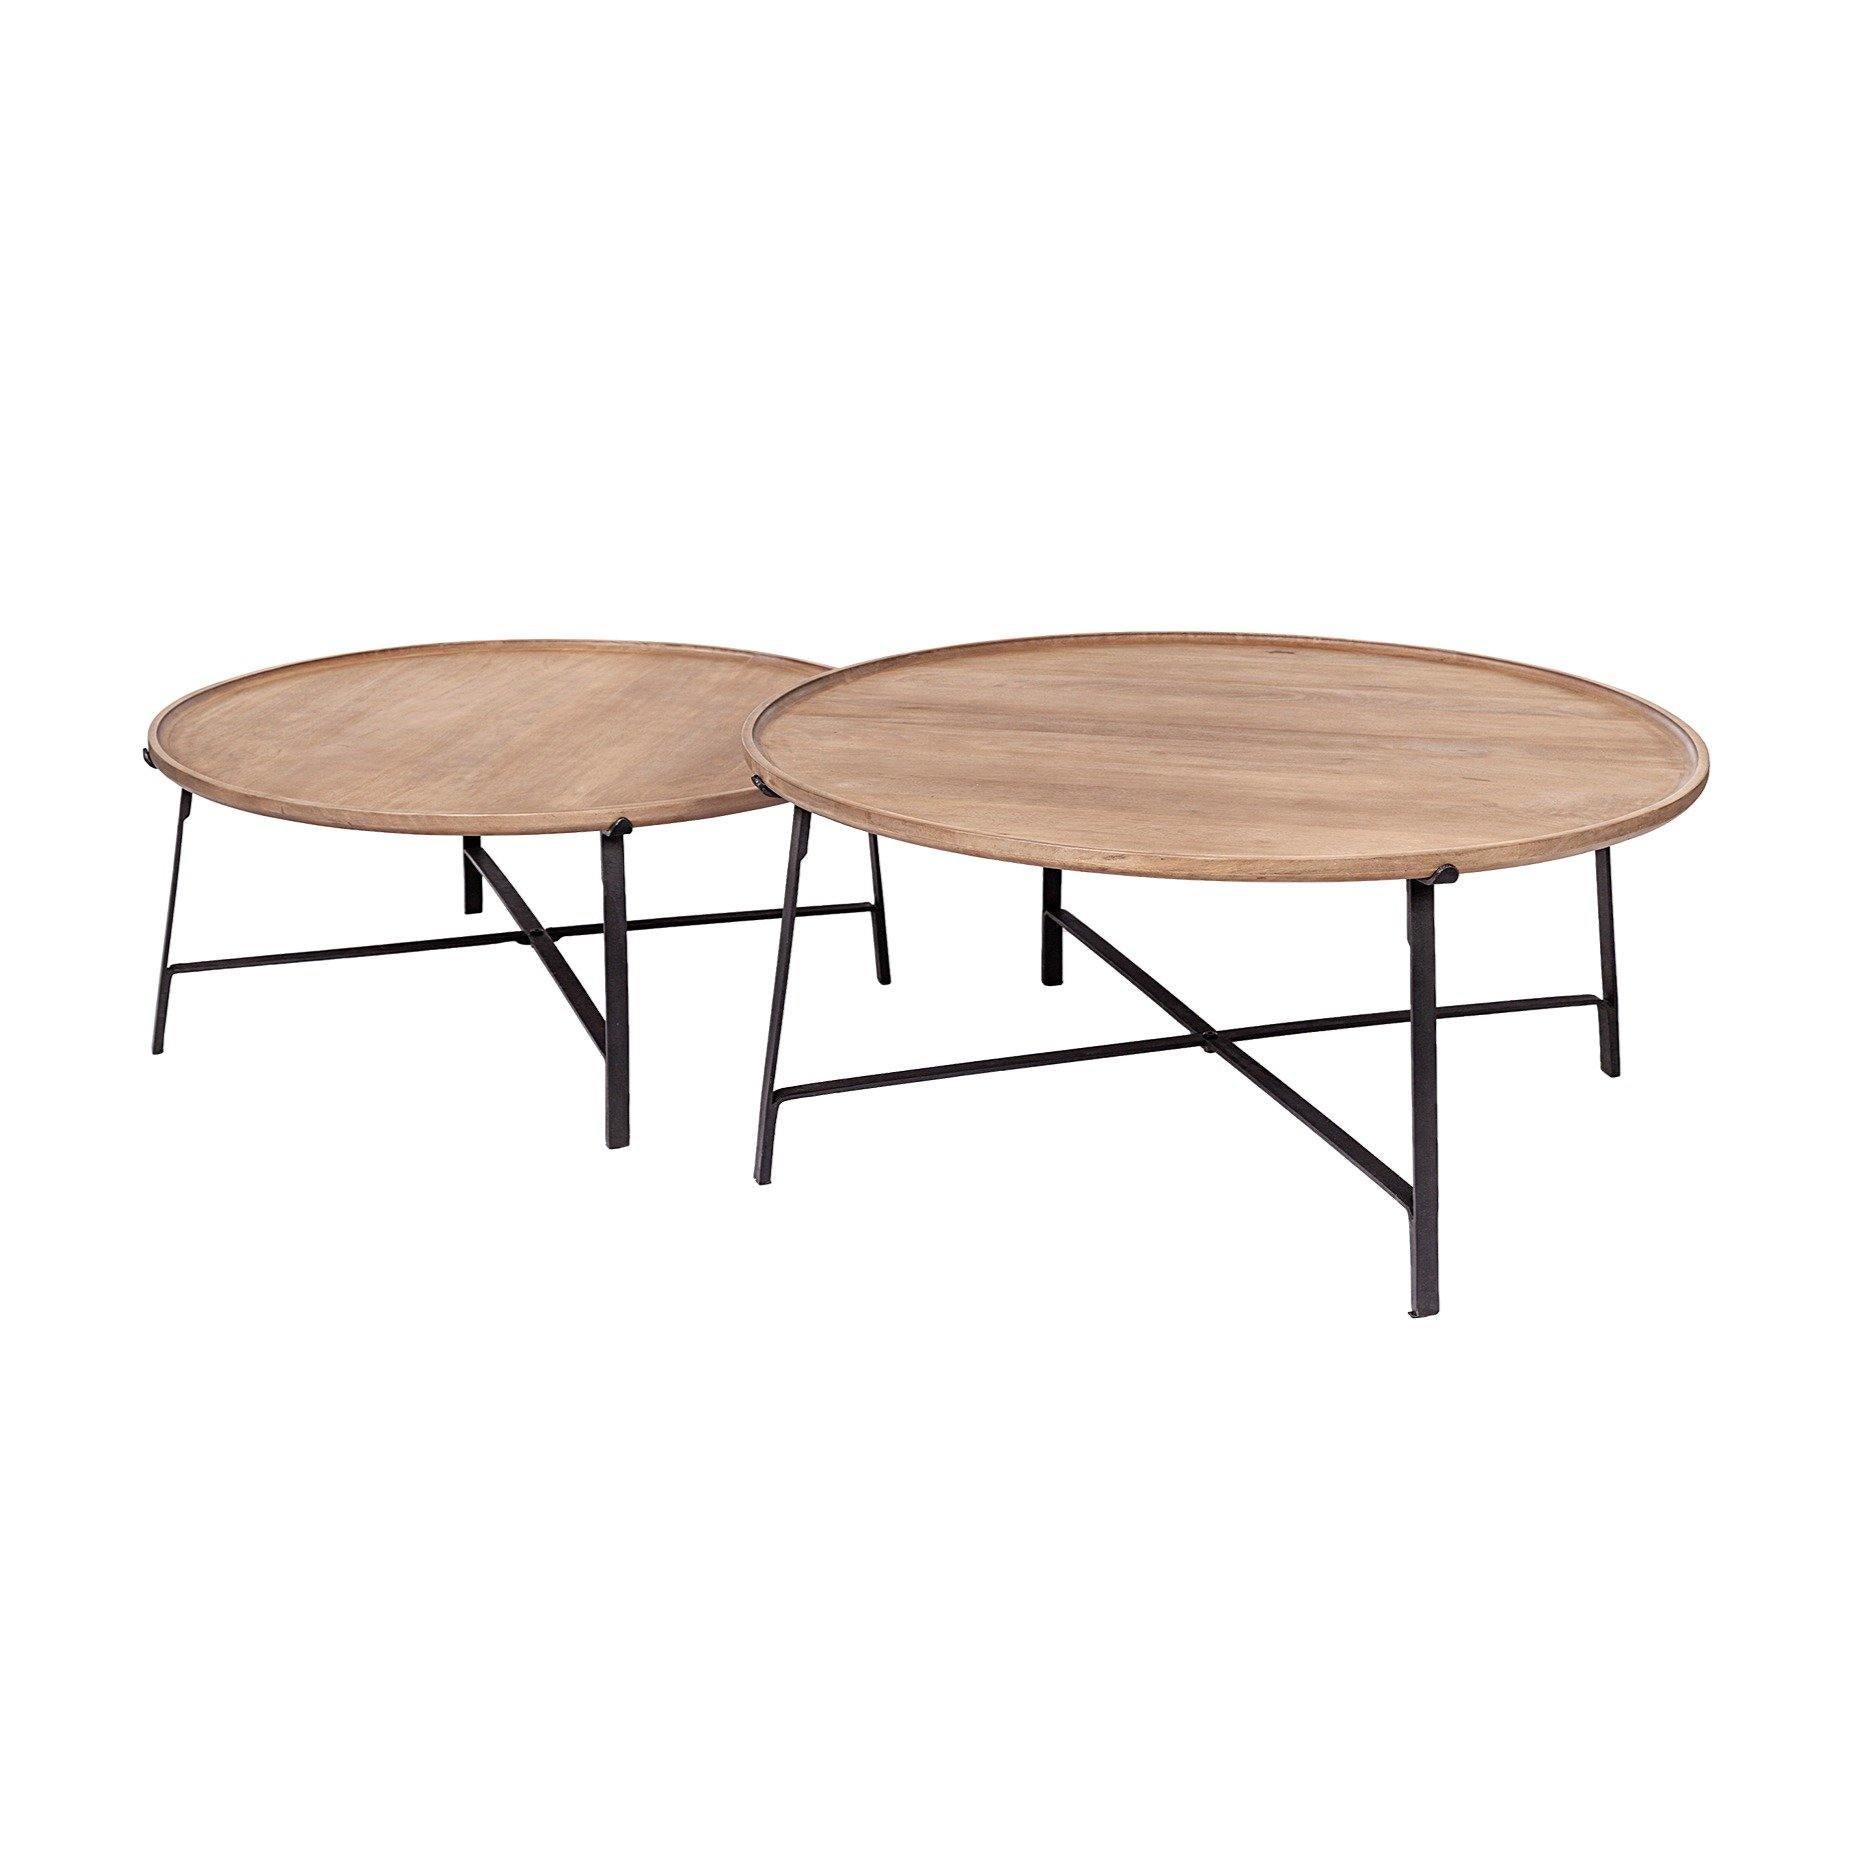 Helios Nesting Coffee Tables - Reimagine Designs - coffee table, new